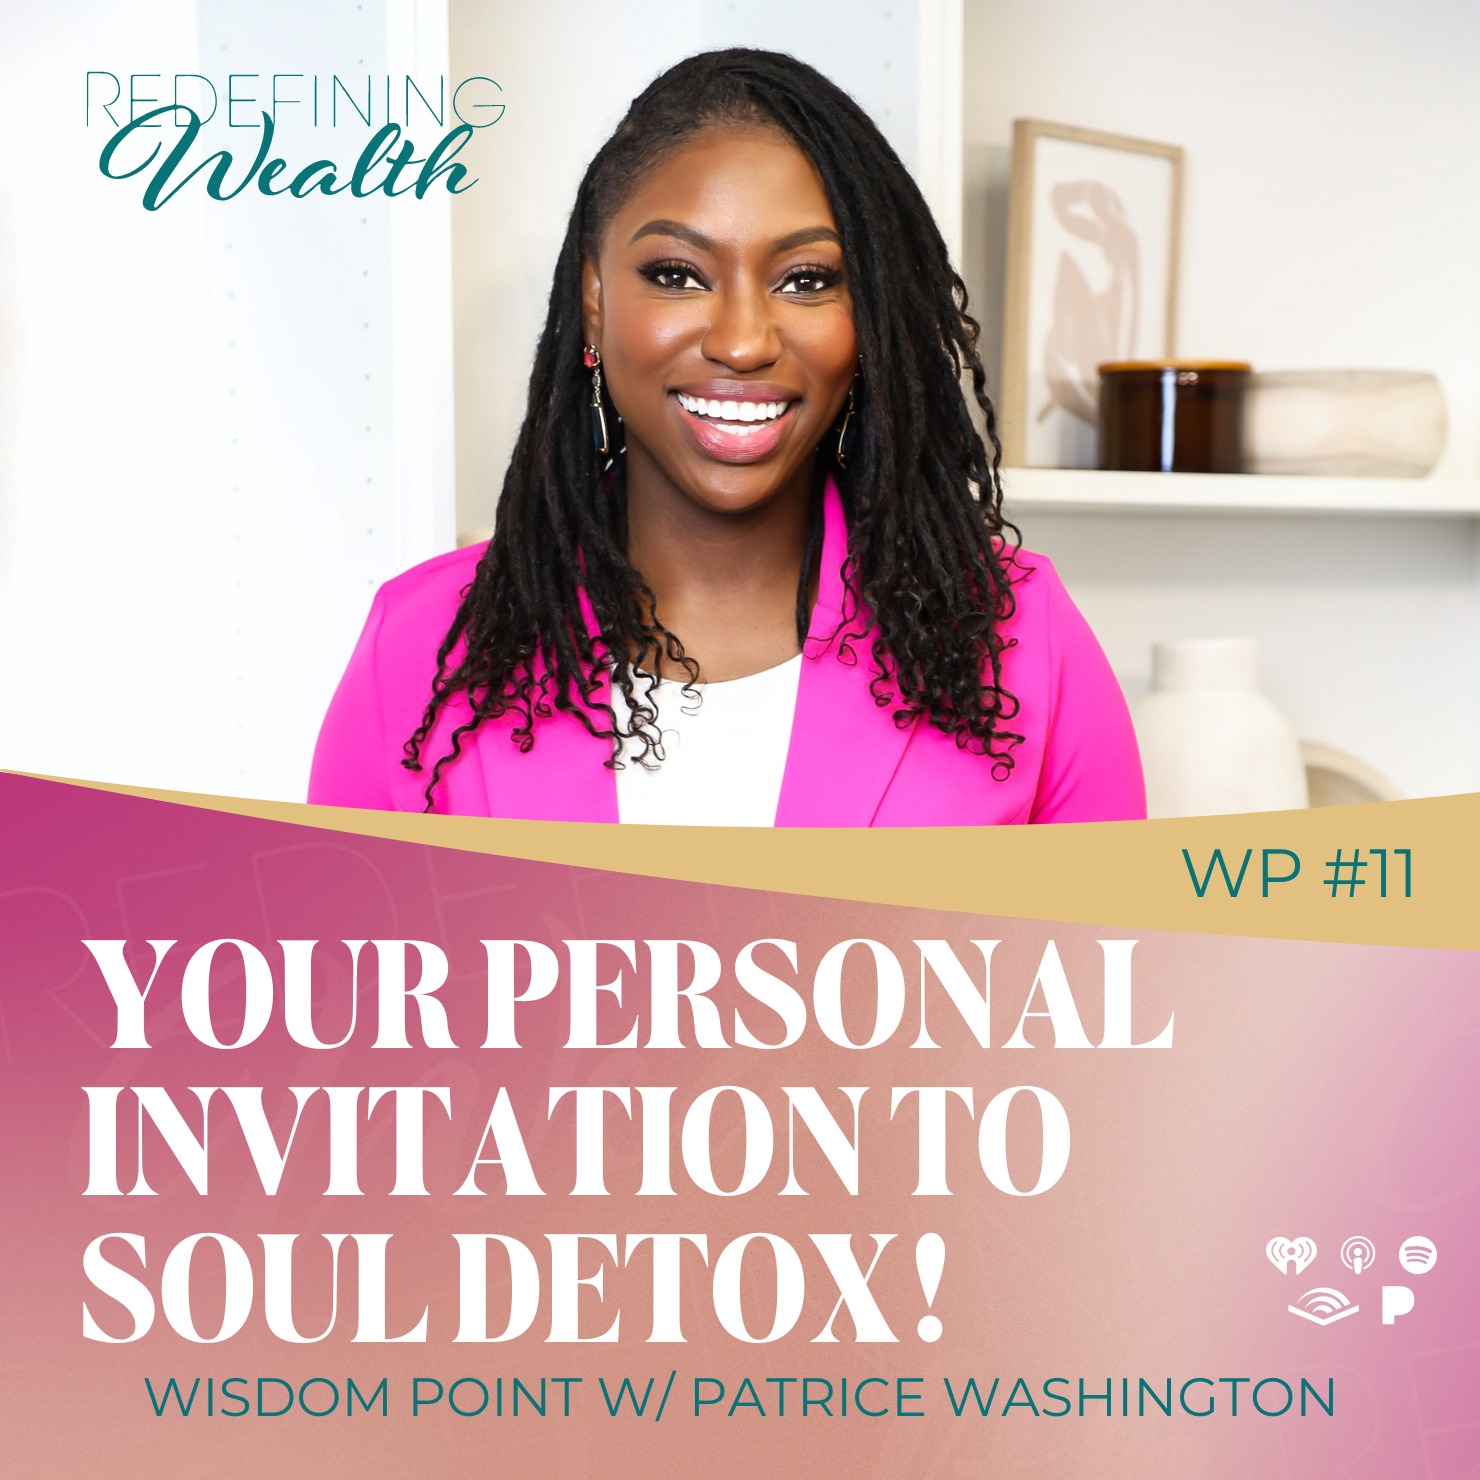 Wisdom Point #11 - Your Personal Invitation to Soul Detox!